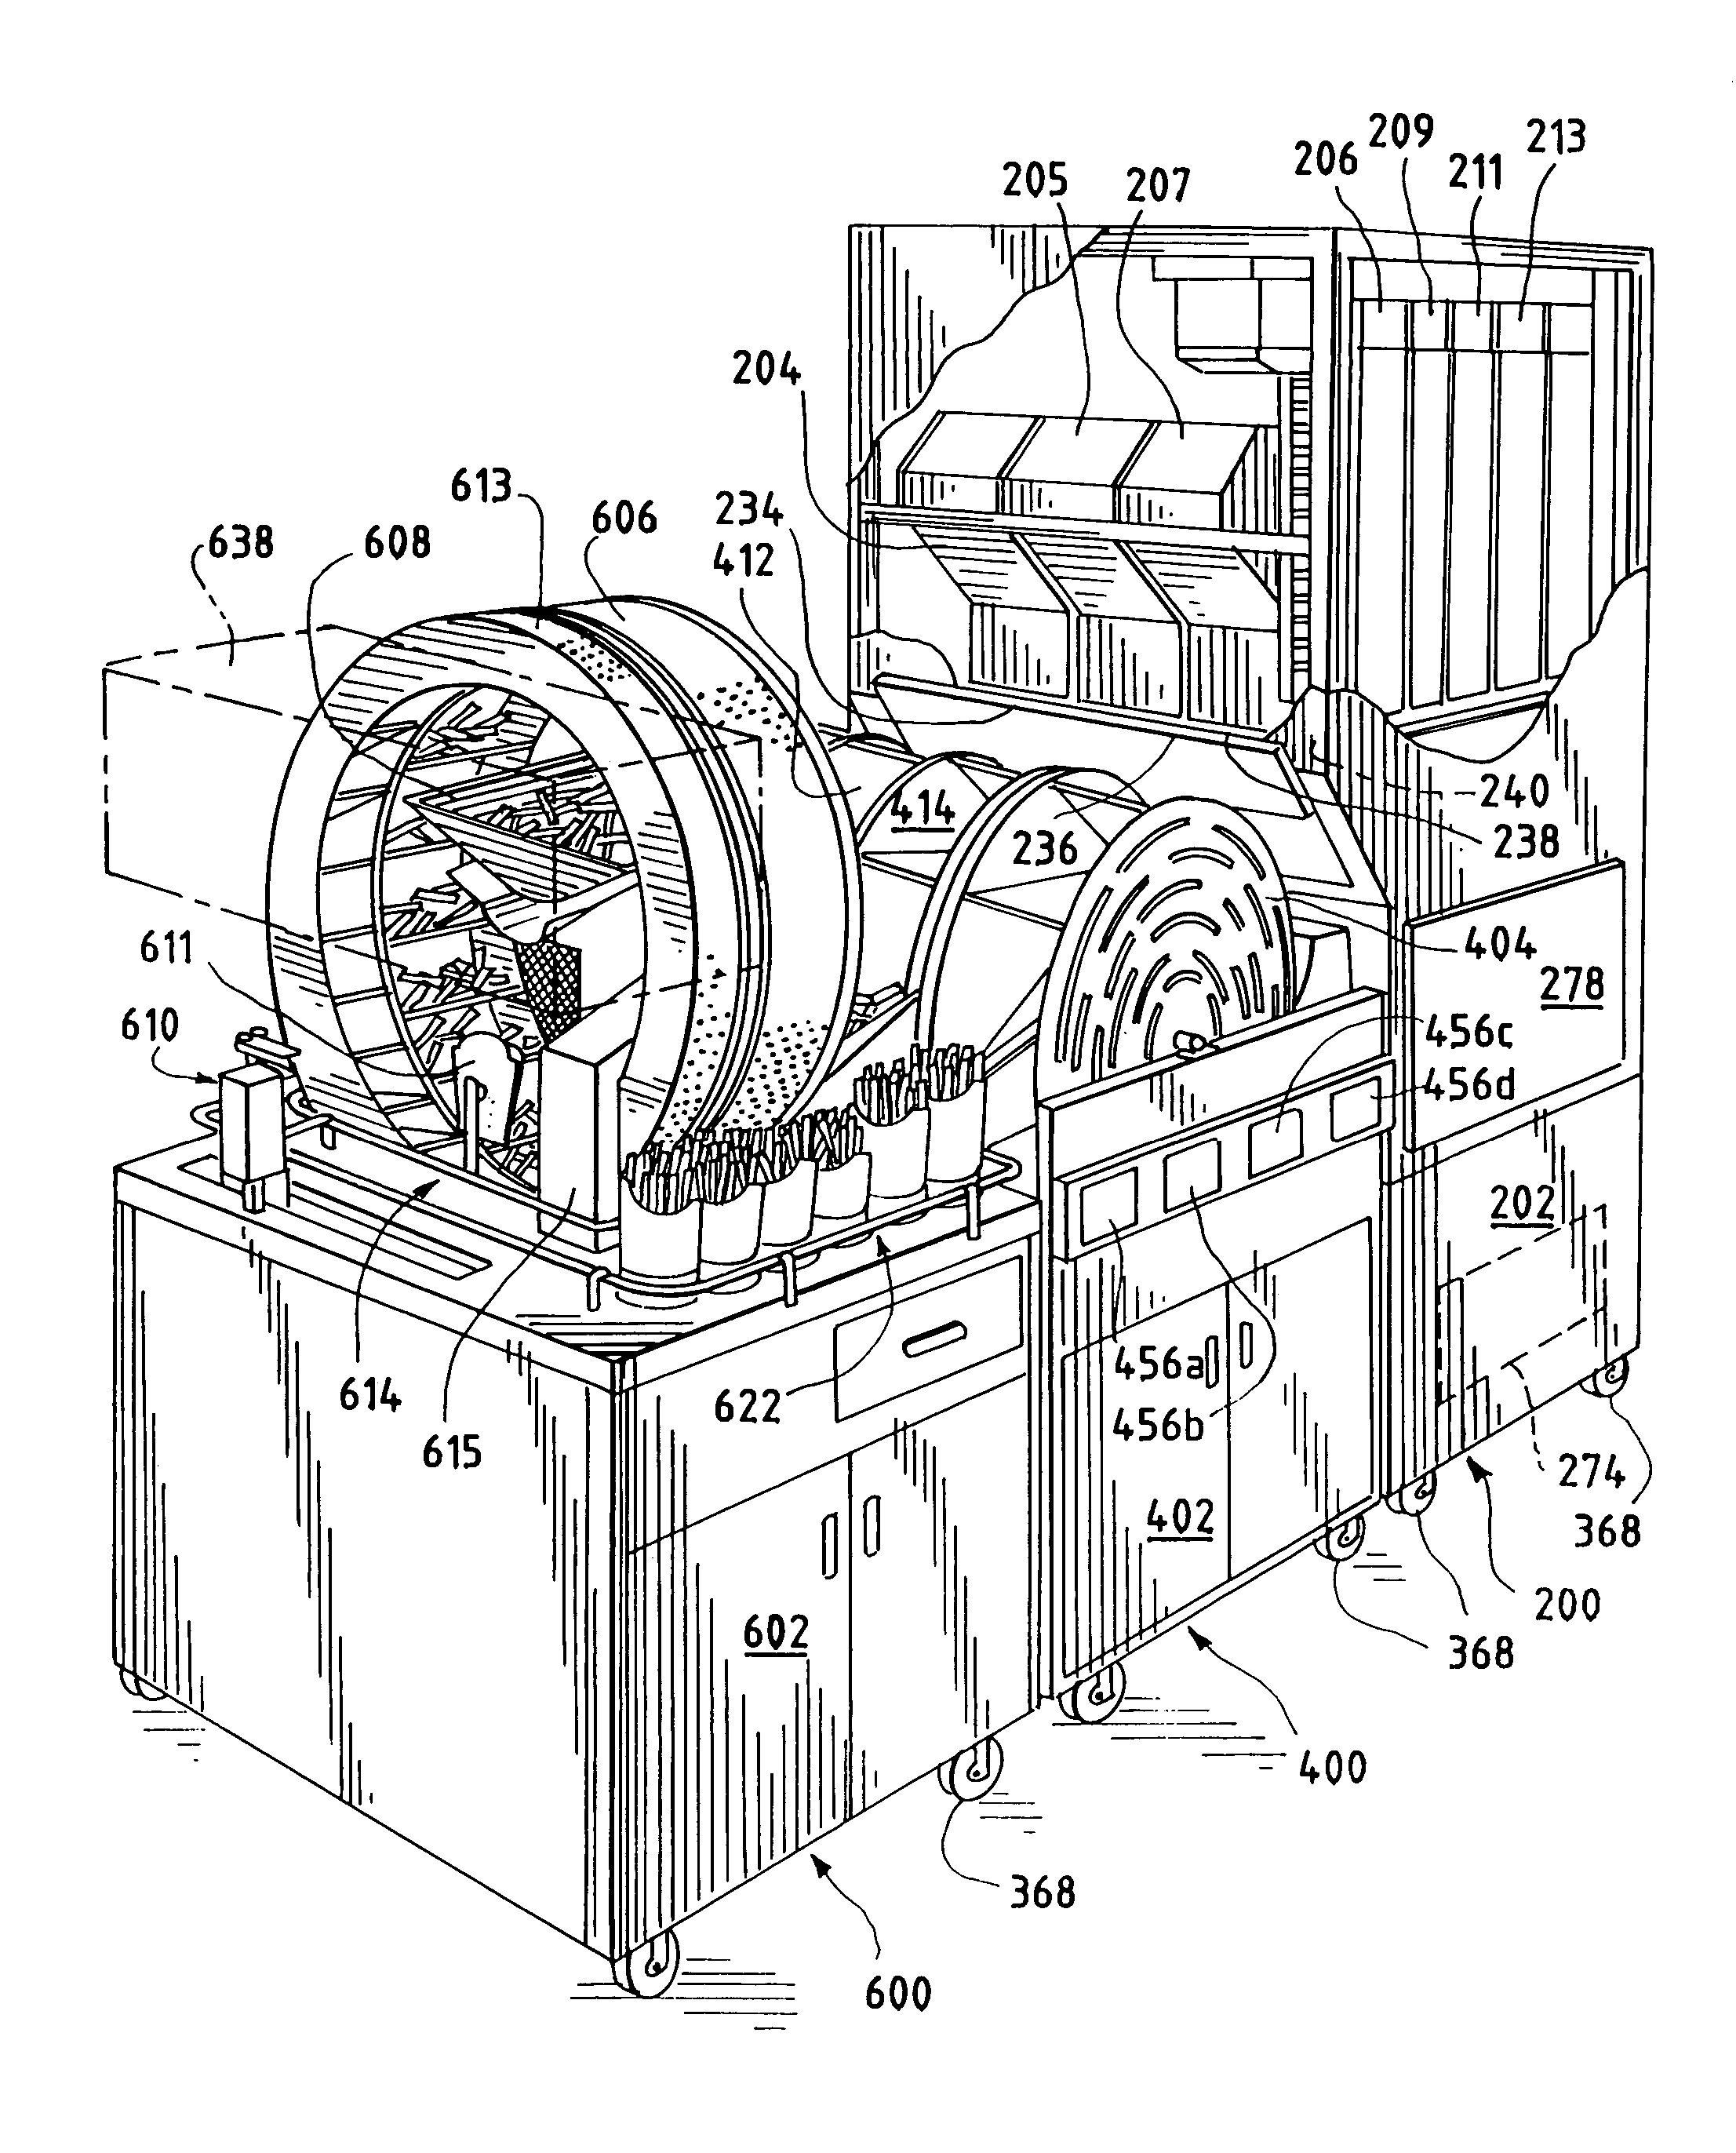 Automated food processing system and method